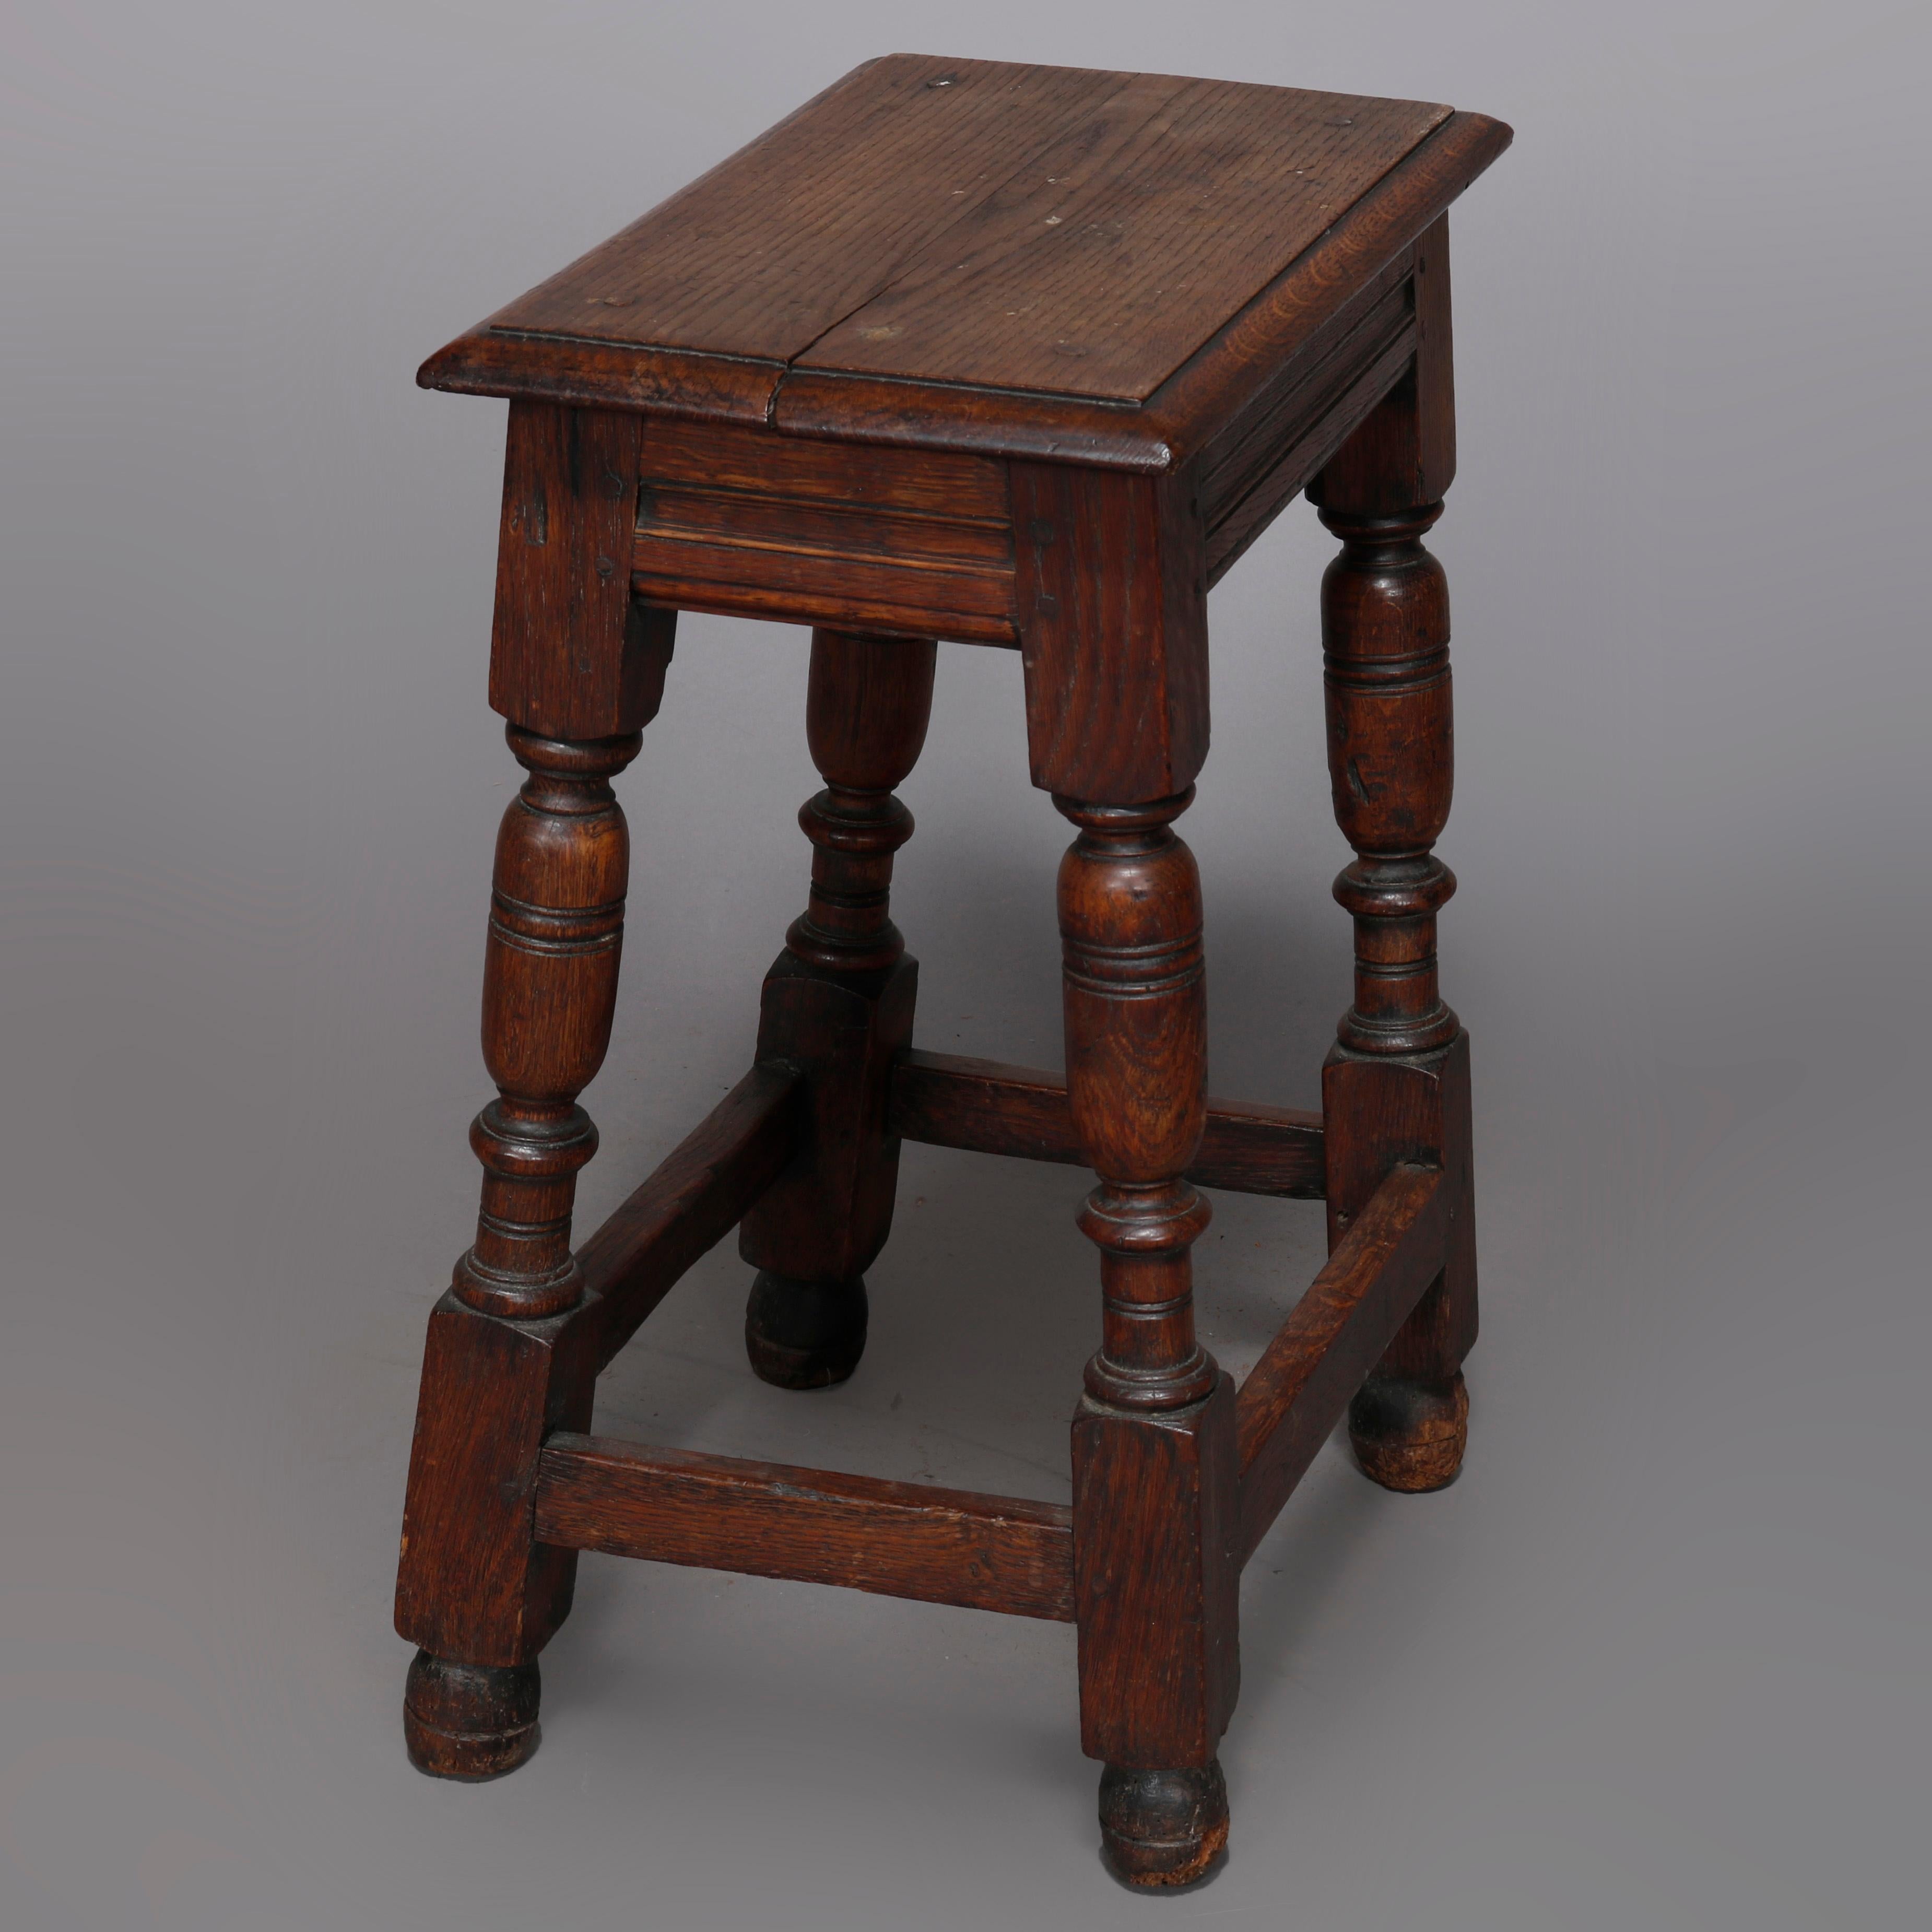 An antique English Jacobean stand or stool offers oak construction with beveled top surmounting balustrade legs with box stretcher, 18th century.

Measures: 22.5